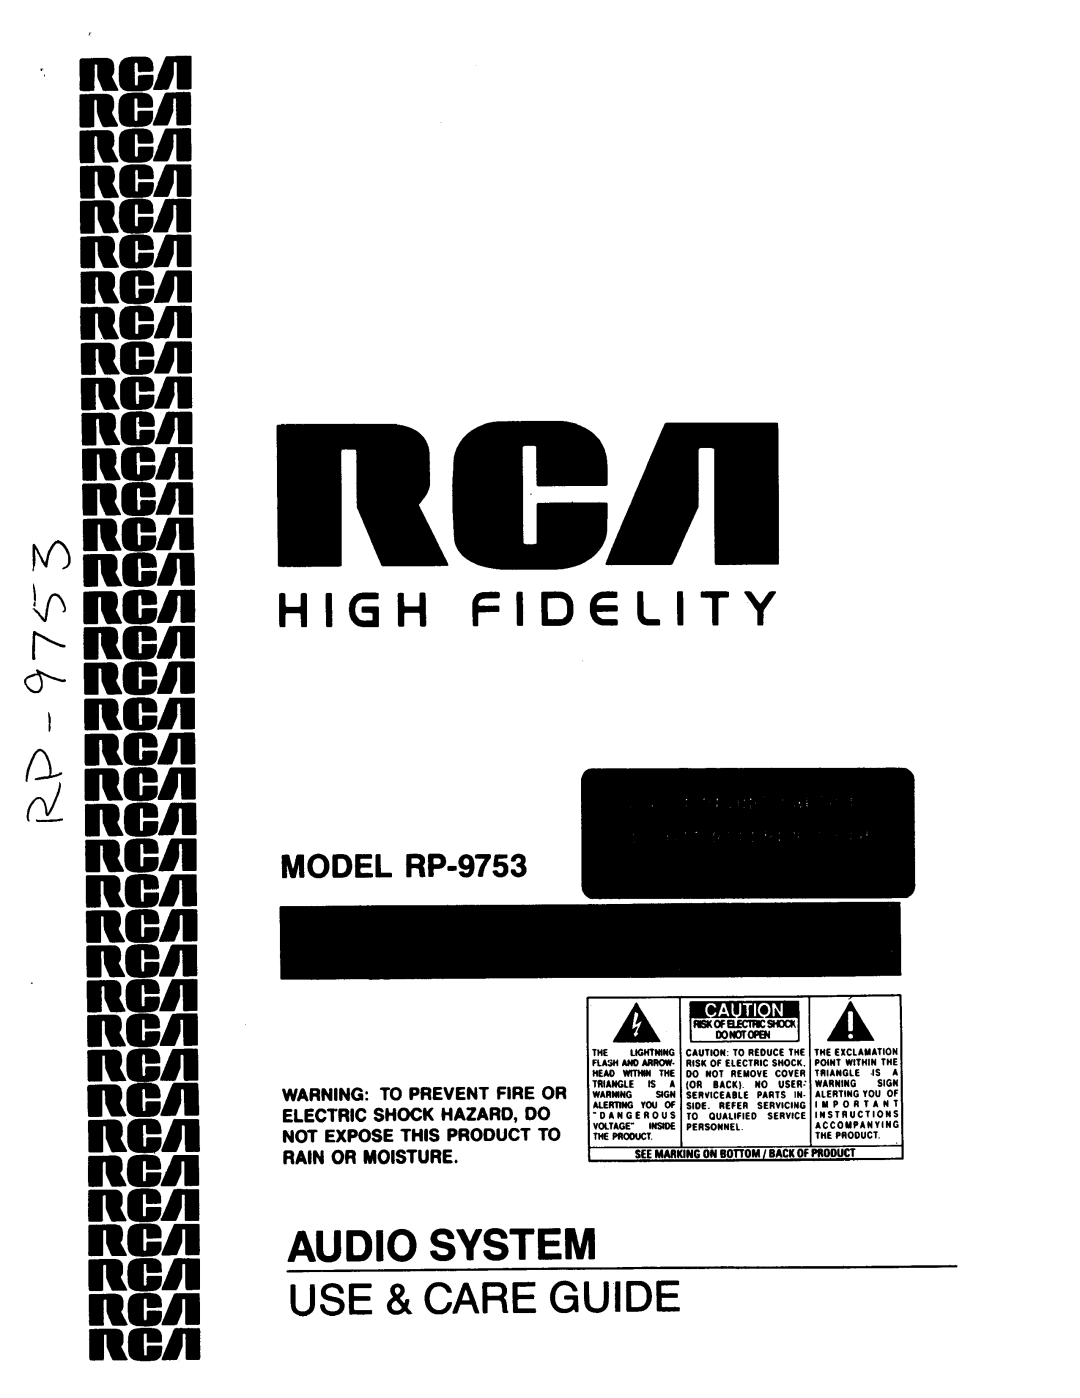 RCA RP-9753 manual men men mn men men mn mn mn8 men, RCA men mn mum iwn mn, T Iwa, High Fidelity, Use &Care Guide 